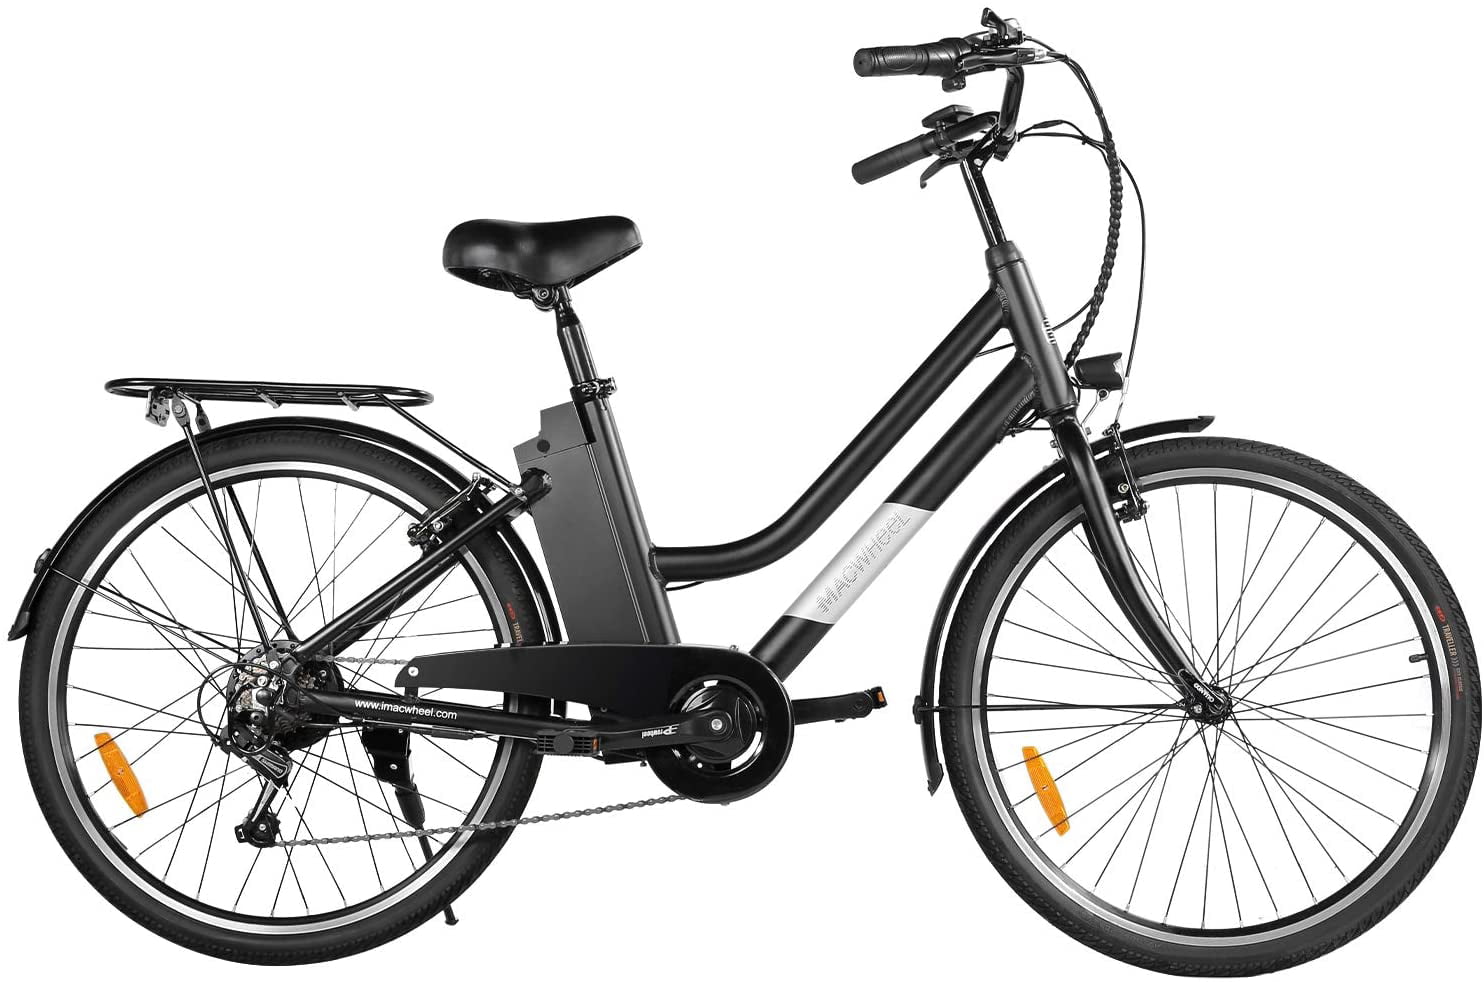 MACWHEEL 26" Electric Bike, Removable 36 V/10 Ah Lithium-ion Battery, 250 W Powerful Motor, Shimano 6-speed Gear Electric Commuter Bike with Throttle and Pedal Assist | LNE-26